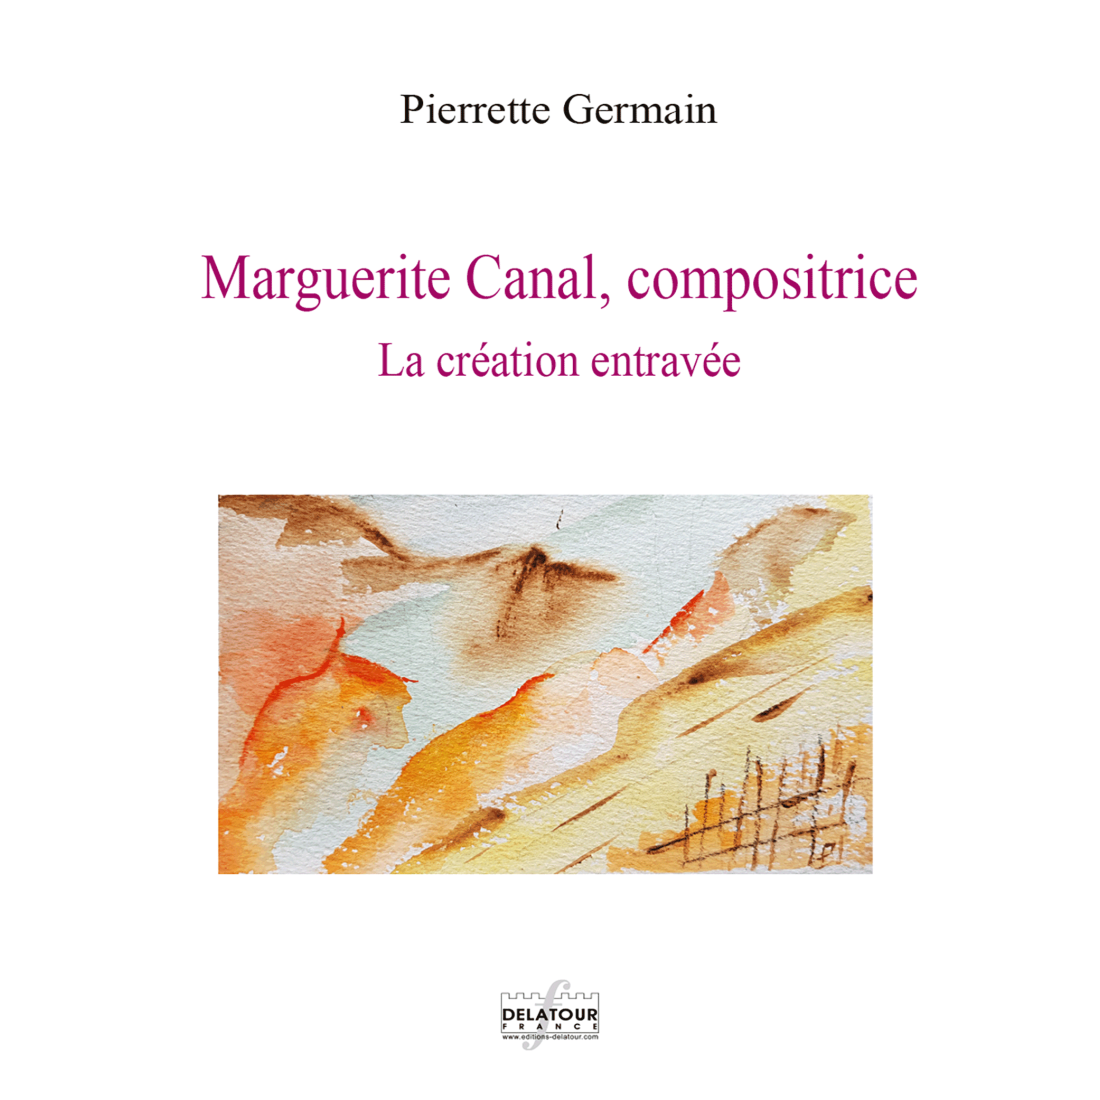 Marguerite Canal, composer